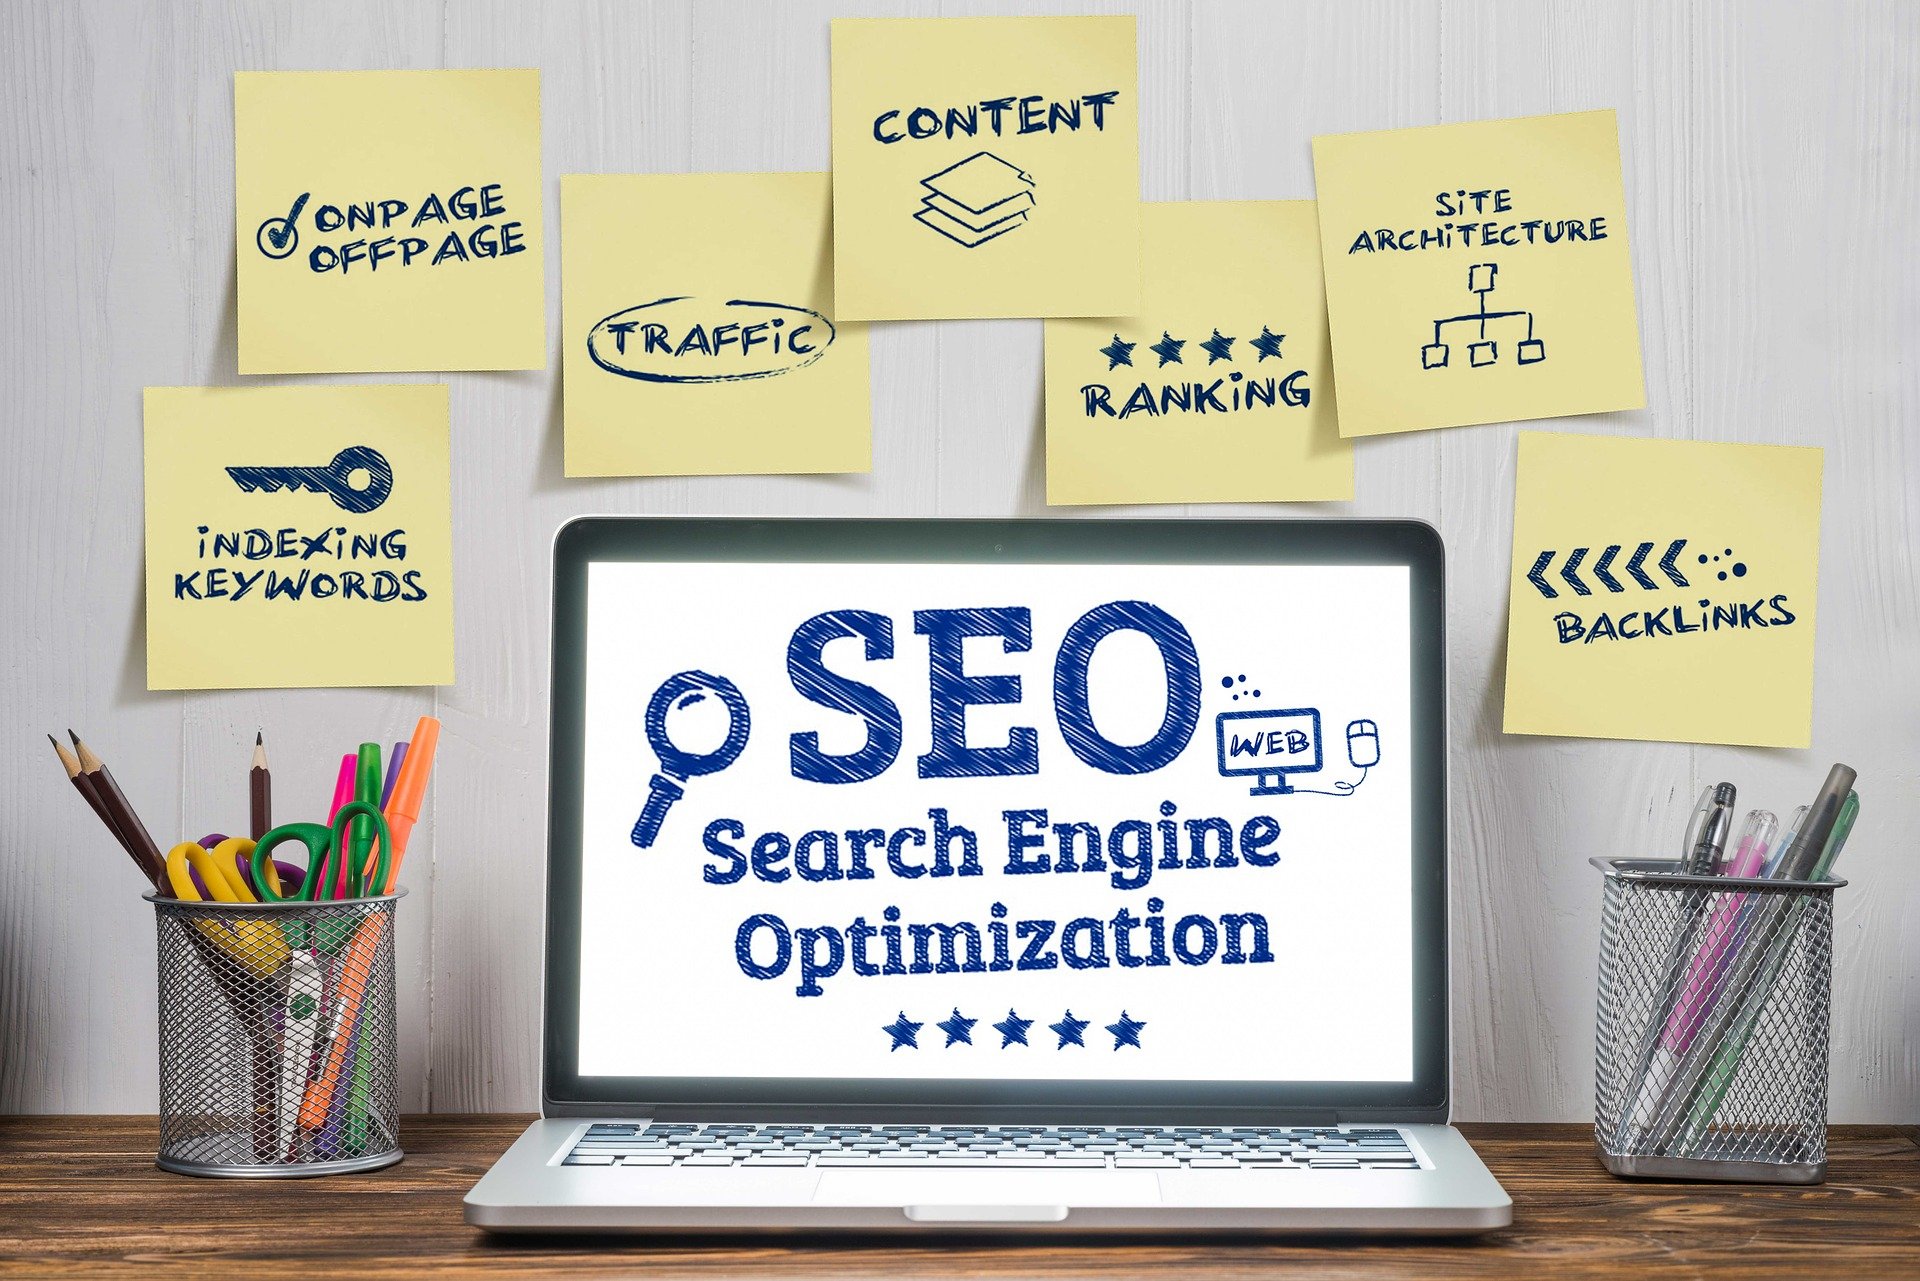 SEO, small businesses can reap the benefits of this cost-effective marketing strategy and grow their business online.